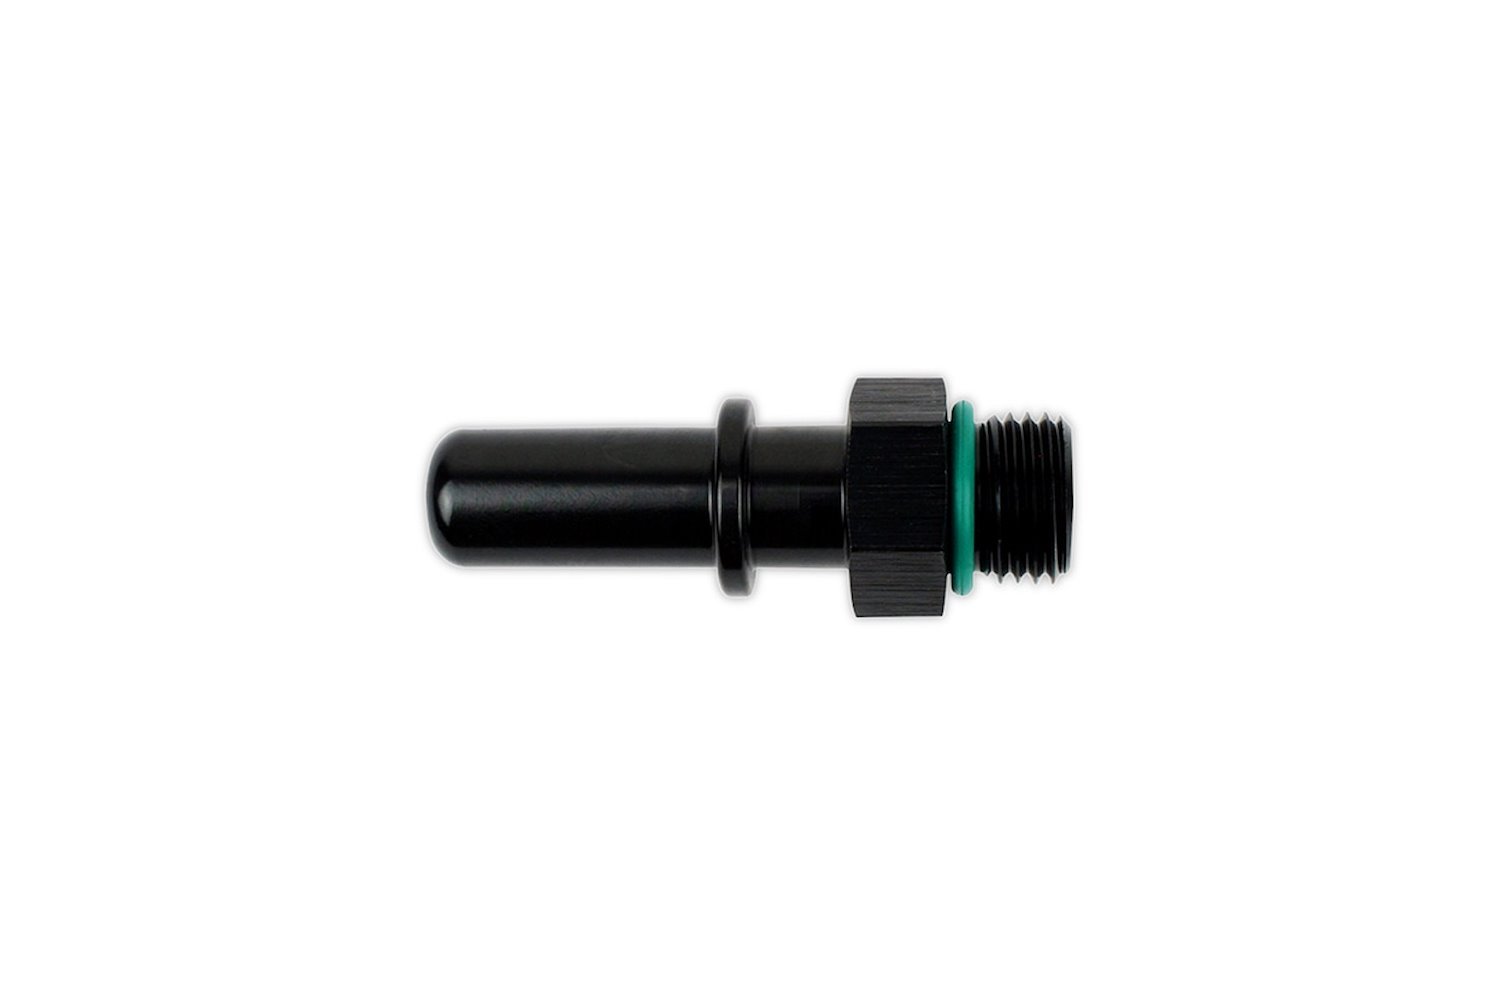 OQ-06-M12 RaceFlux Quick Connect Male Tube Adapter Fitting, -6AN Male ORB to M12, SAE J2044